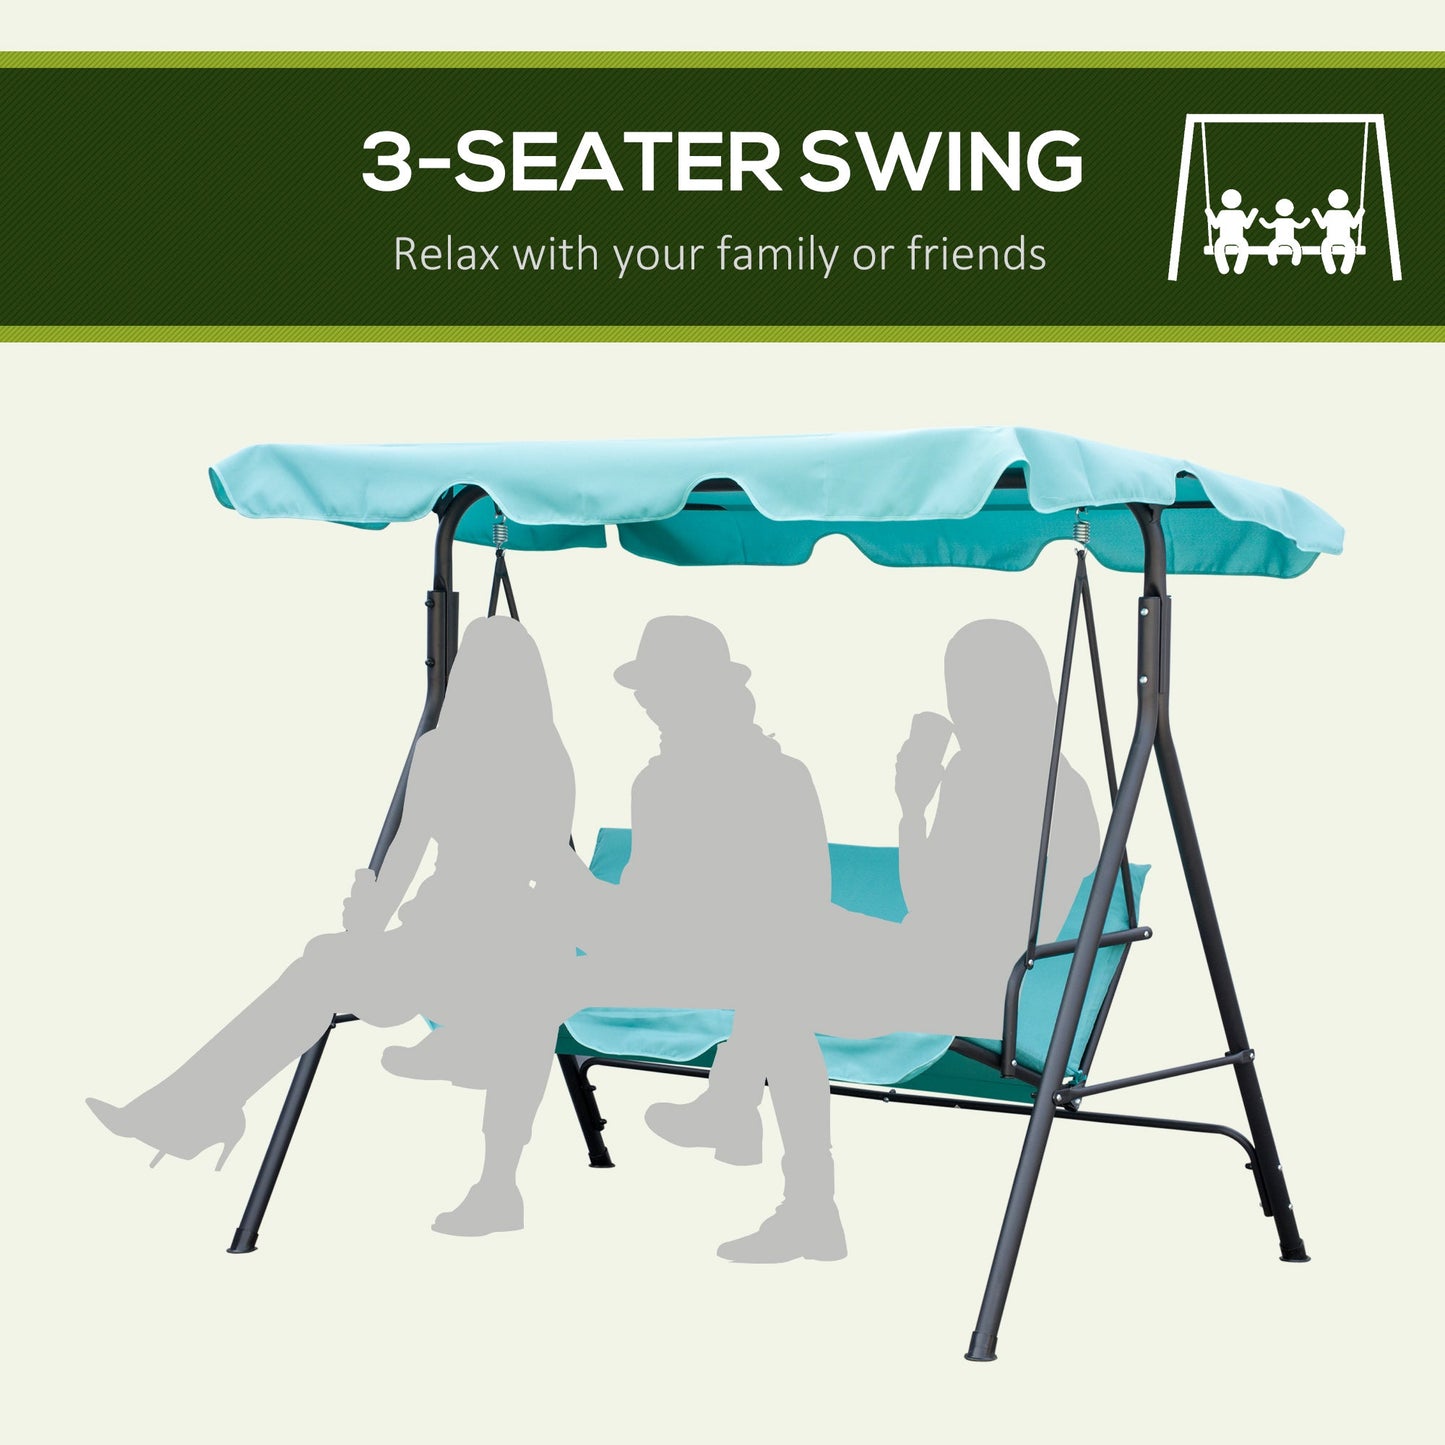 Outdoor and Garden-Patio Porch Swing Chair with Adjustable Canopy, Seats 3 Adults, Steel Frame, Armrests, Green - Outdoor Style Company